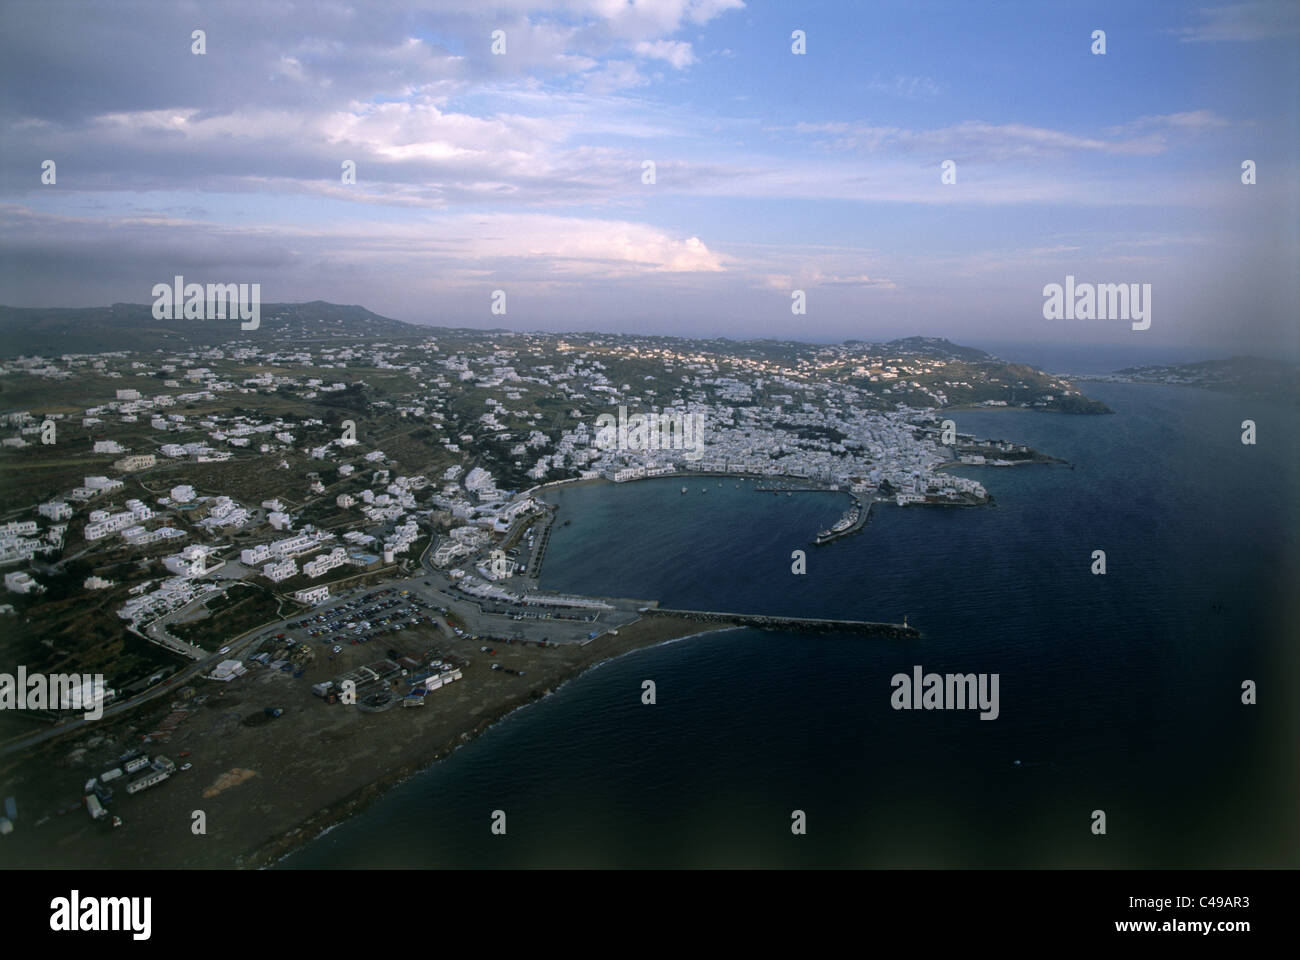 Aerial photograph of the Greek island of Mikonos Stock Photo